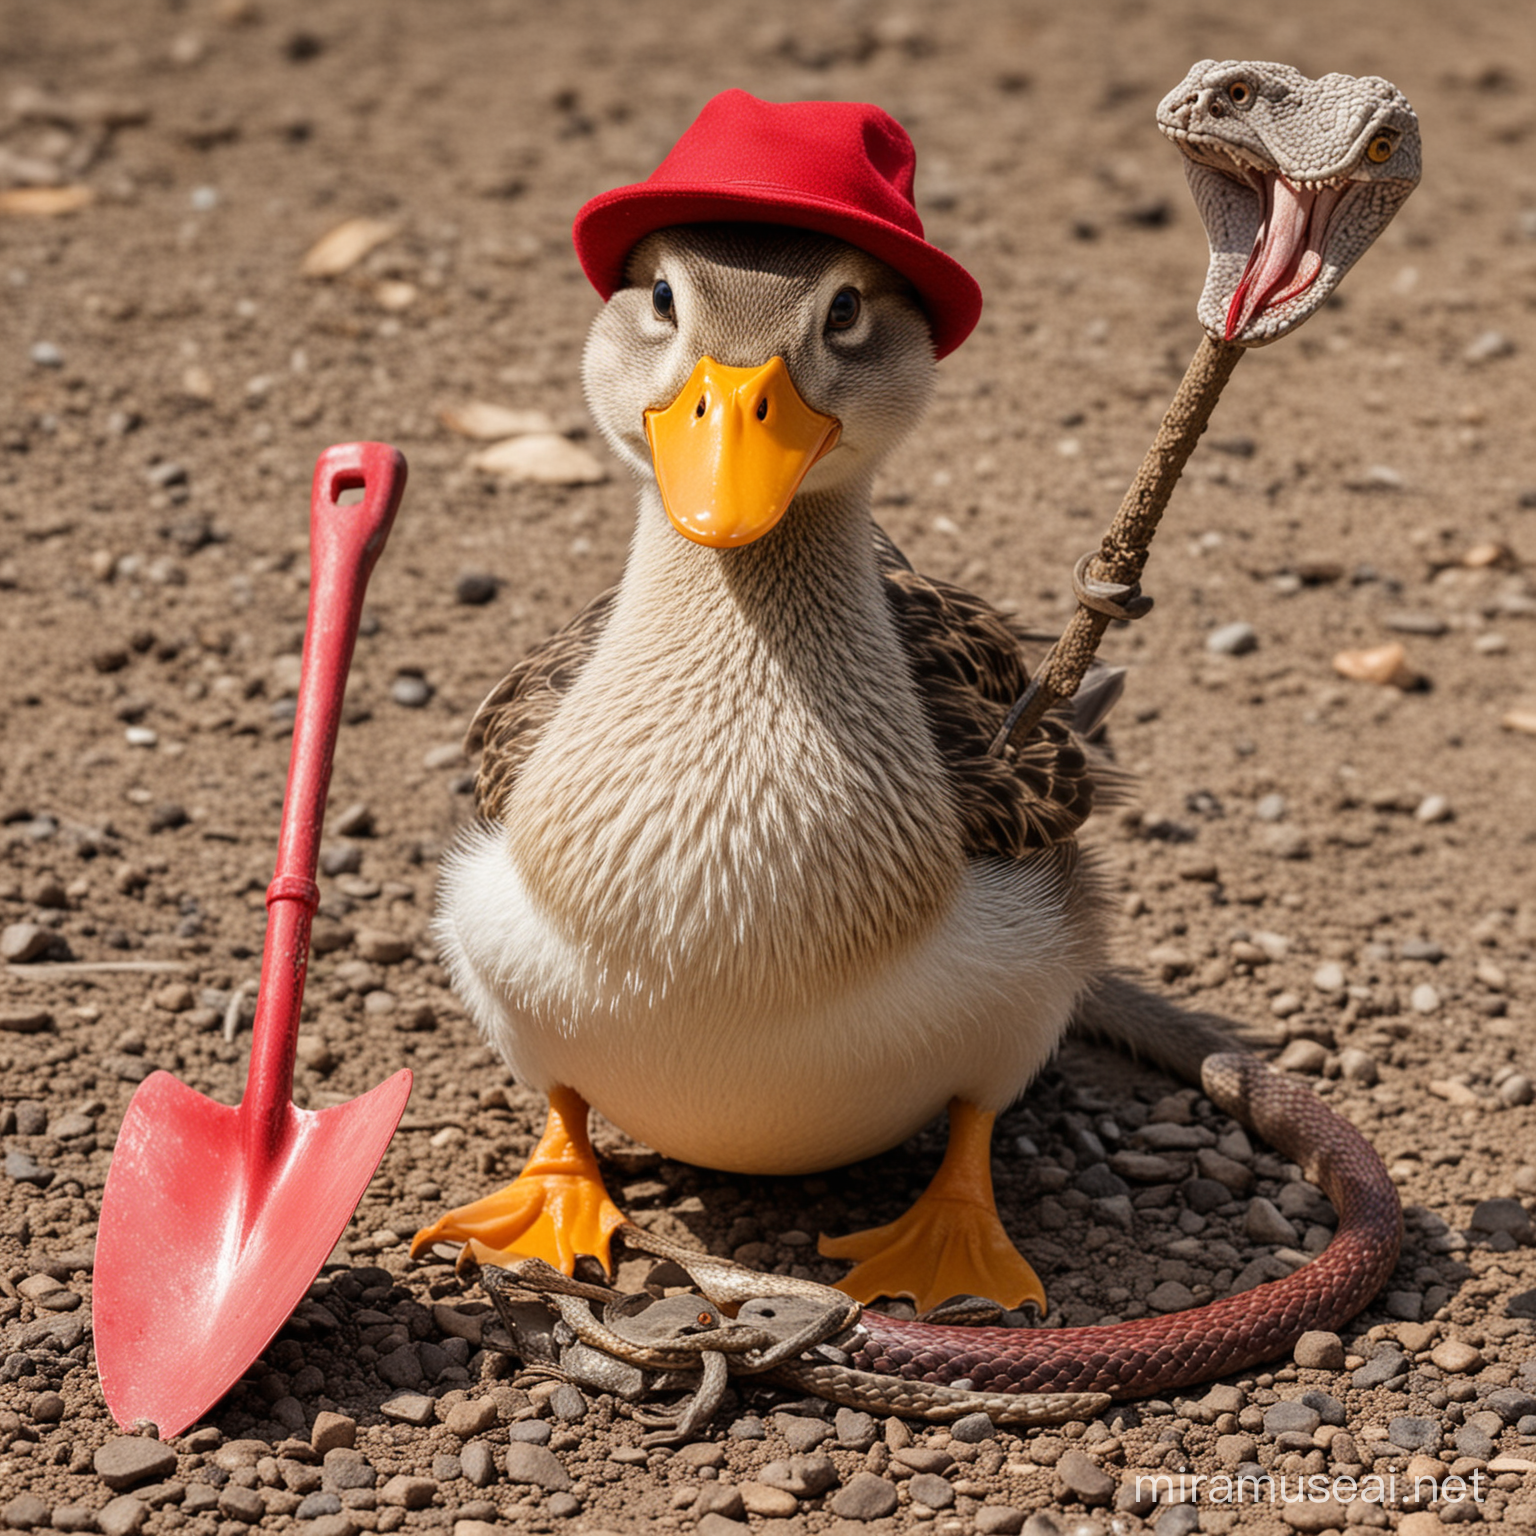 Duck with Red Hat Holding Shovel Next to Dead Snake